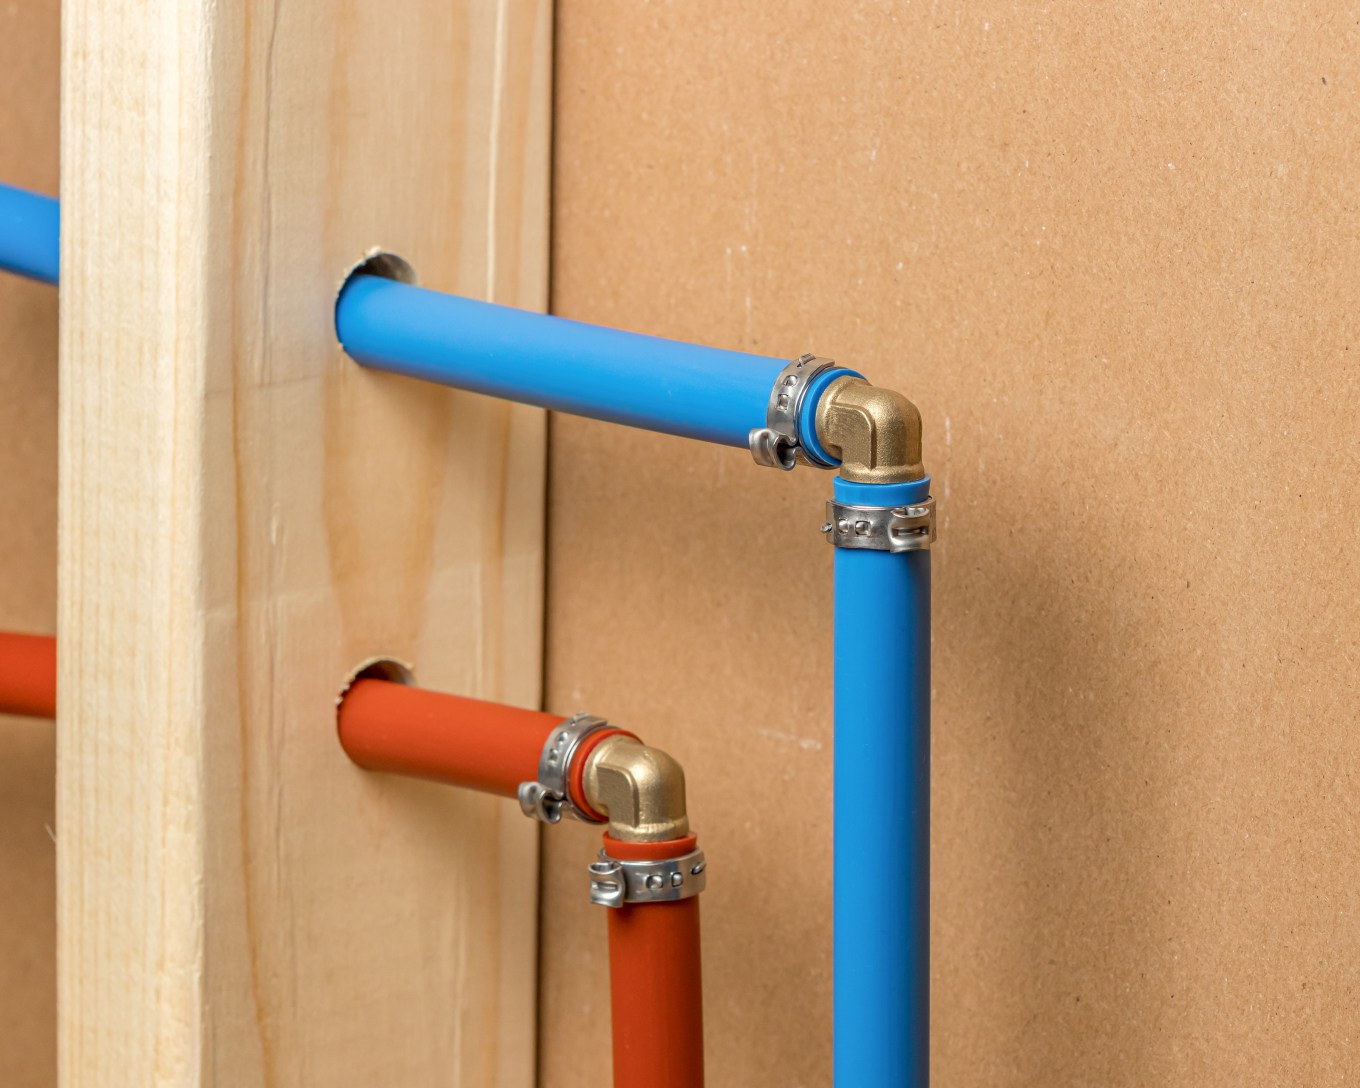 Image of some PEX pipes to clearly show what PEX plumbing is.